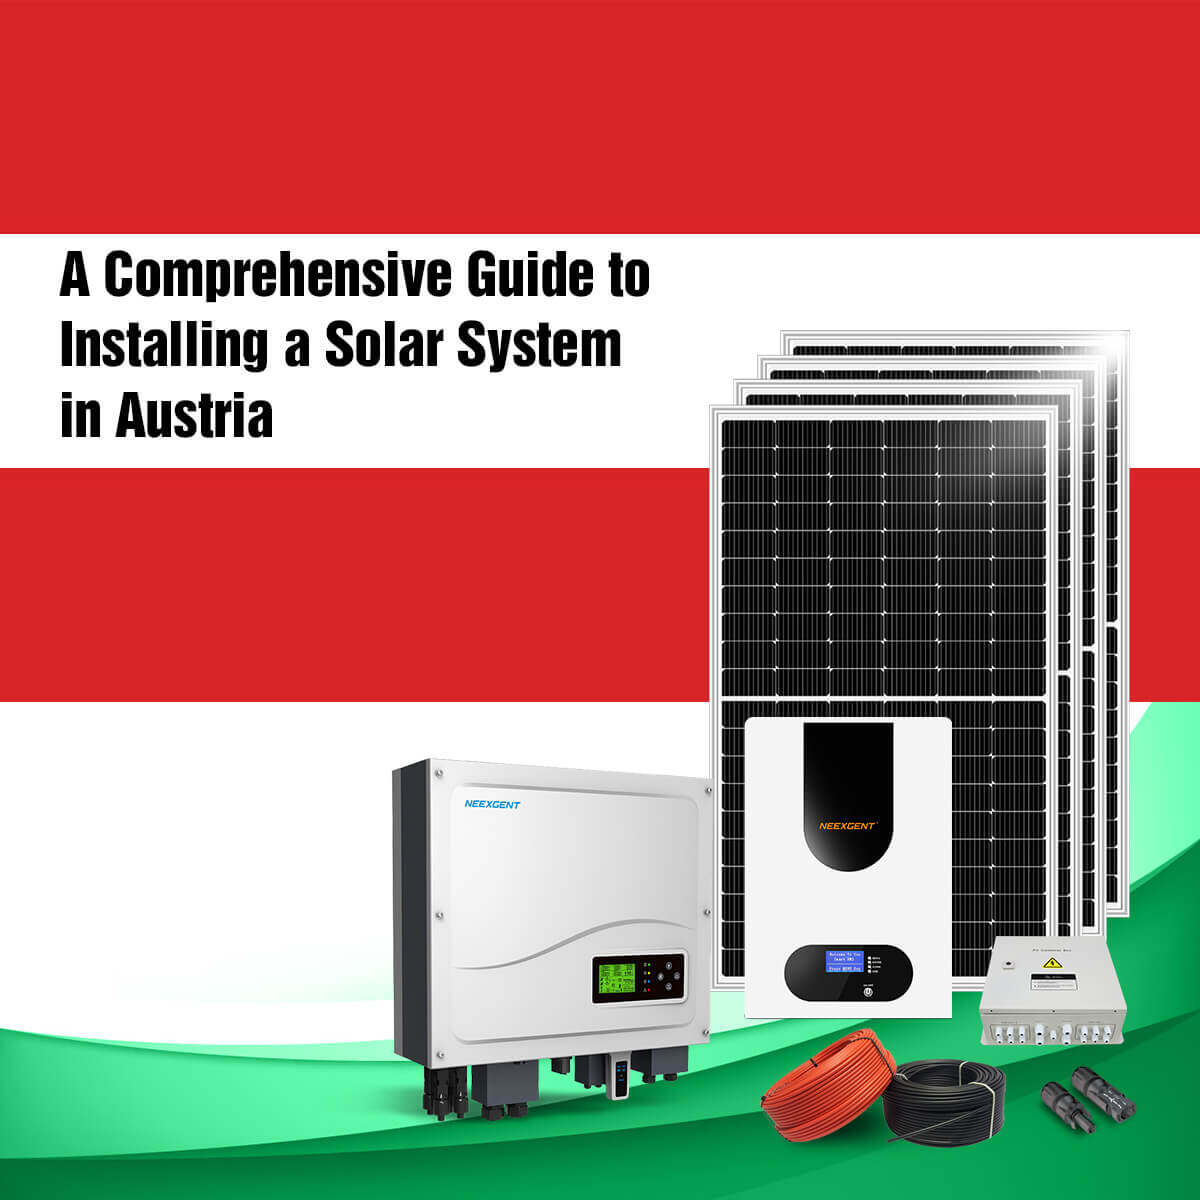 A Comprehensive Guide to Installing a Solar System in Austria